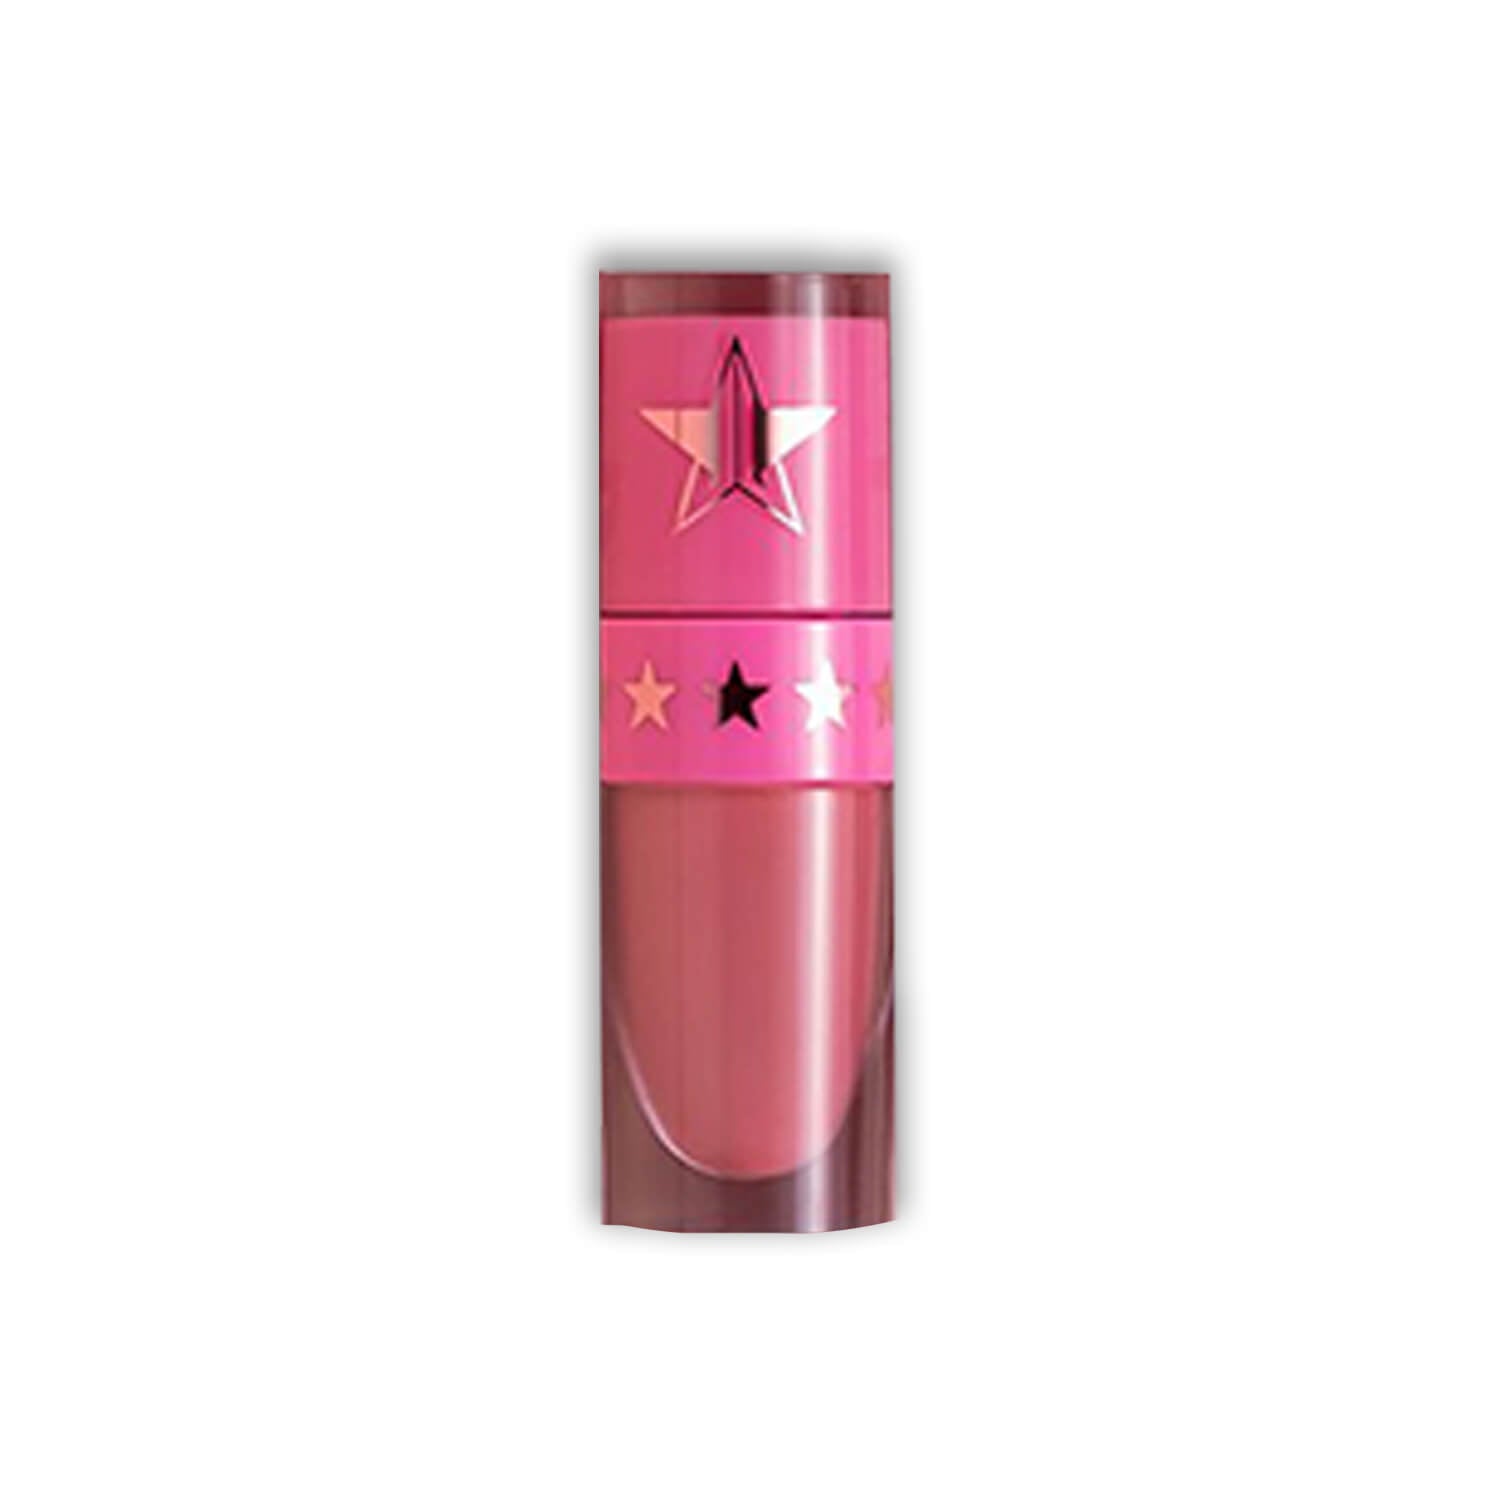 Shop Jeffree star min lipstick available at Heygirl.pk for delivery in Pakistan